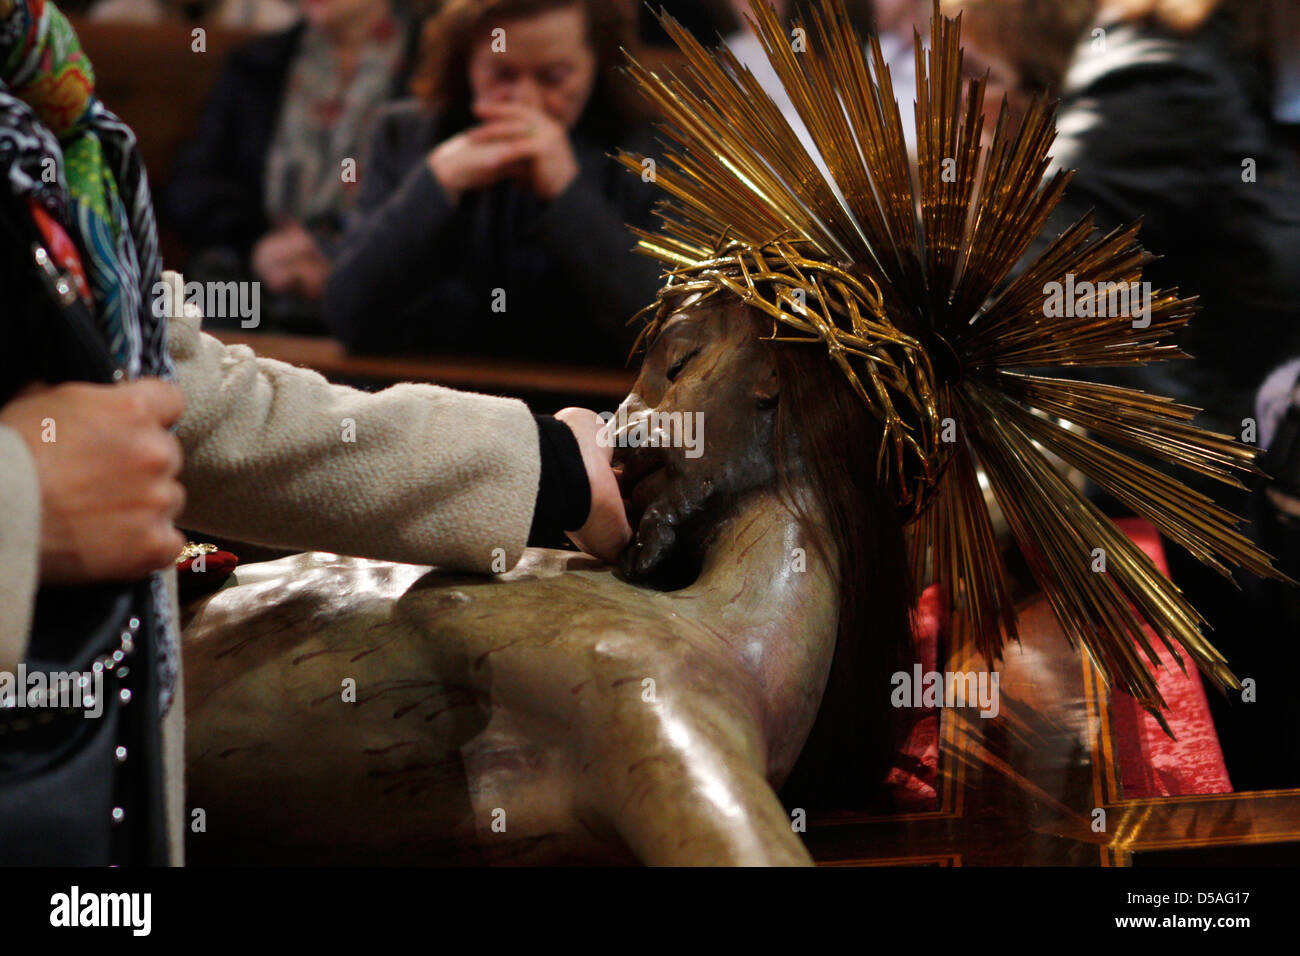 People pray near a statue representing Christ inside a church during easter week in Spain Stock Photo